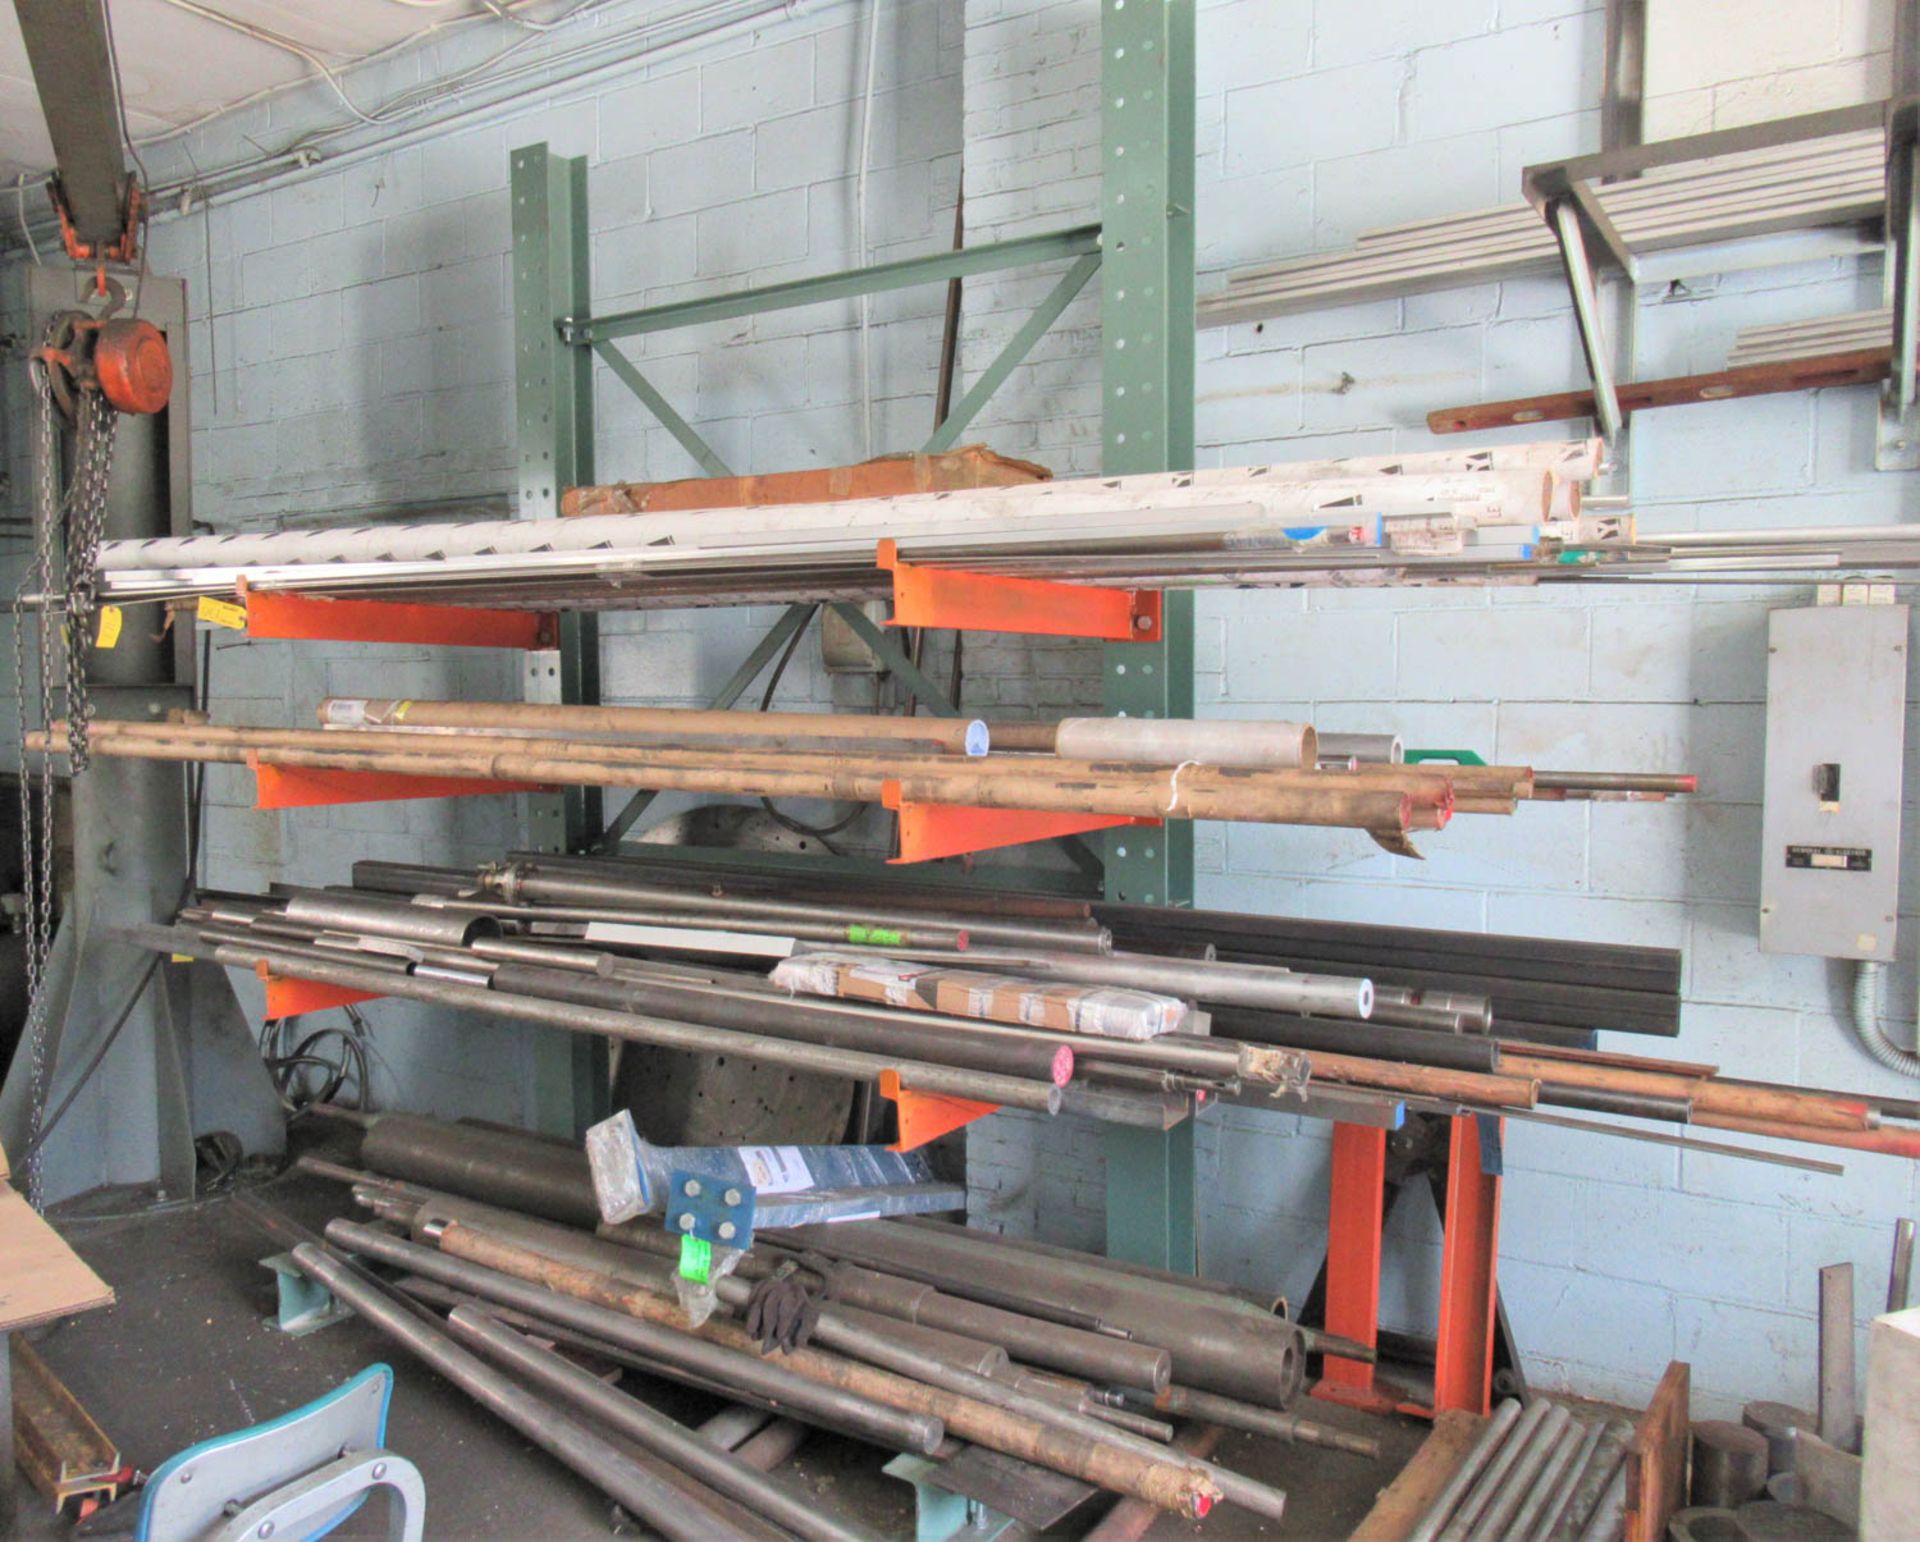 CANTILEVER STOCK RACK, 72" WIDE X 120" HIGH, 36" ARMS, ADJUSTABLE ARMS (NO CONTENTS)